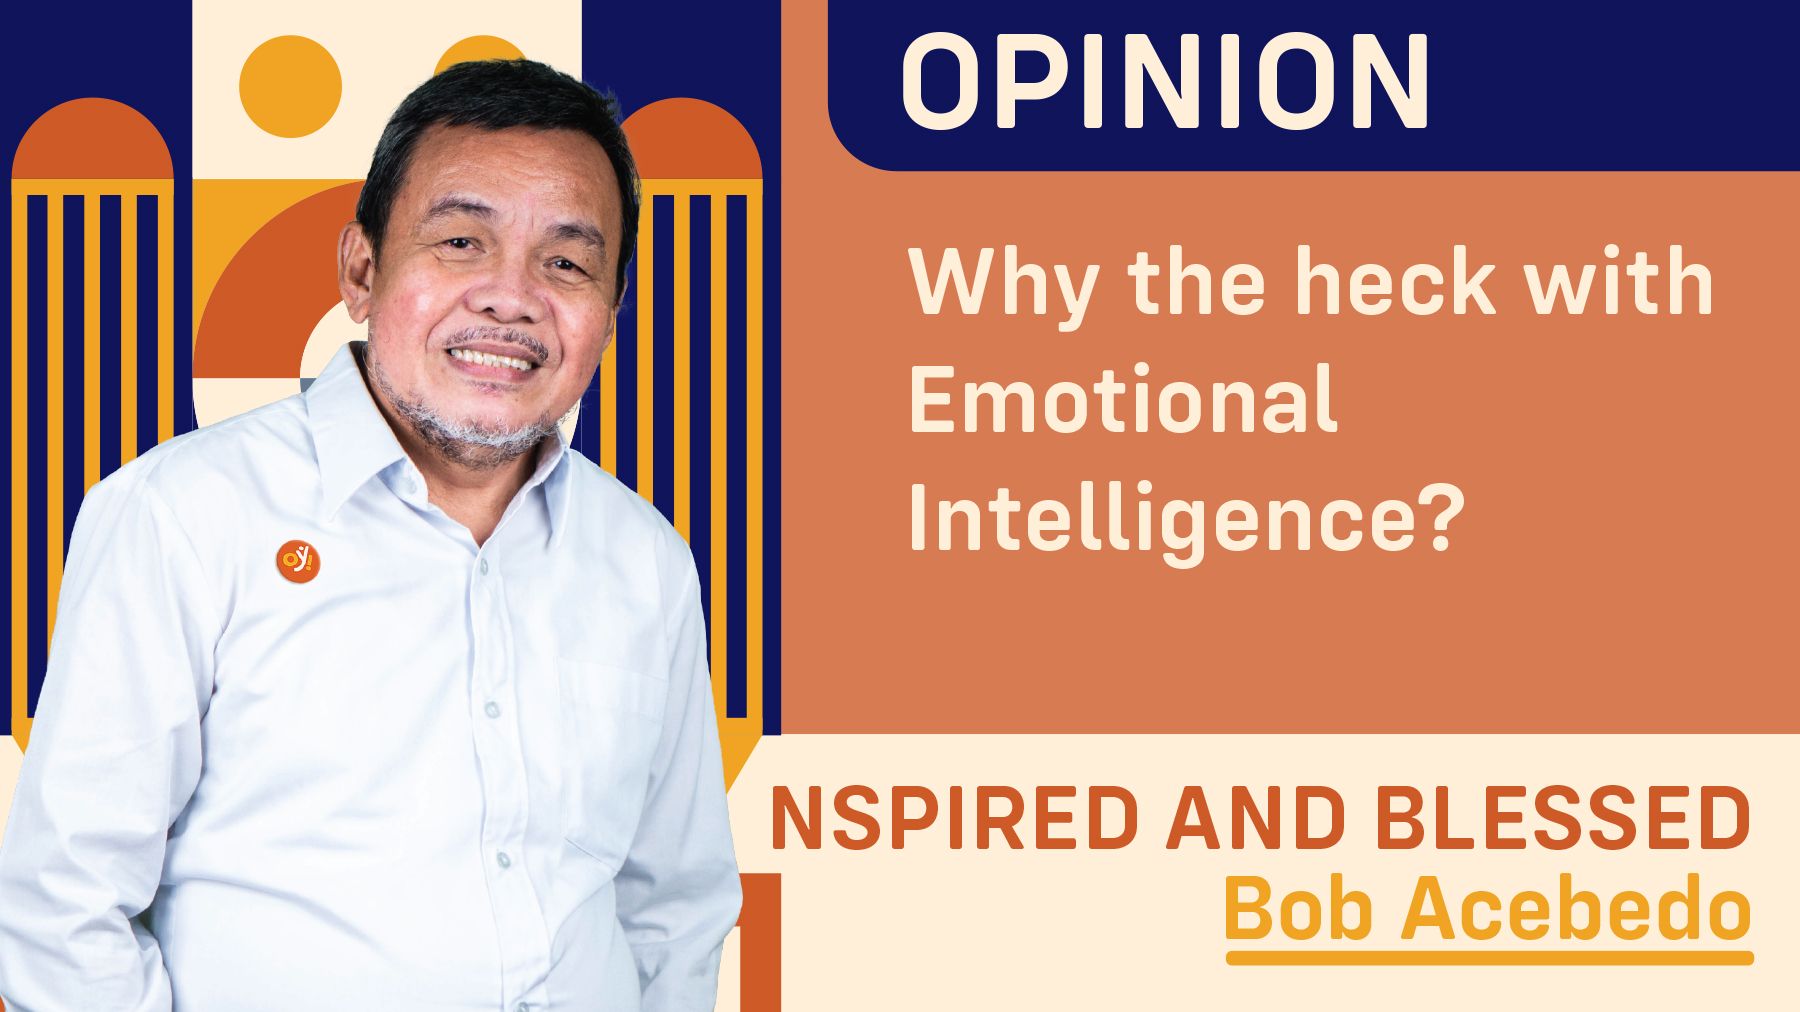 Why the heck with Emotional Intelligence?